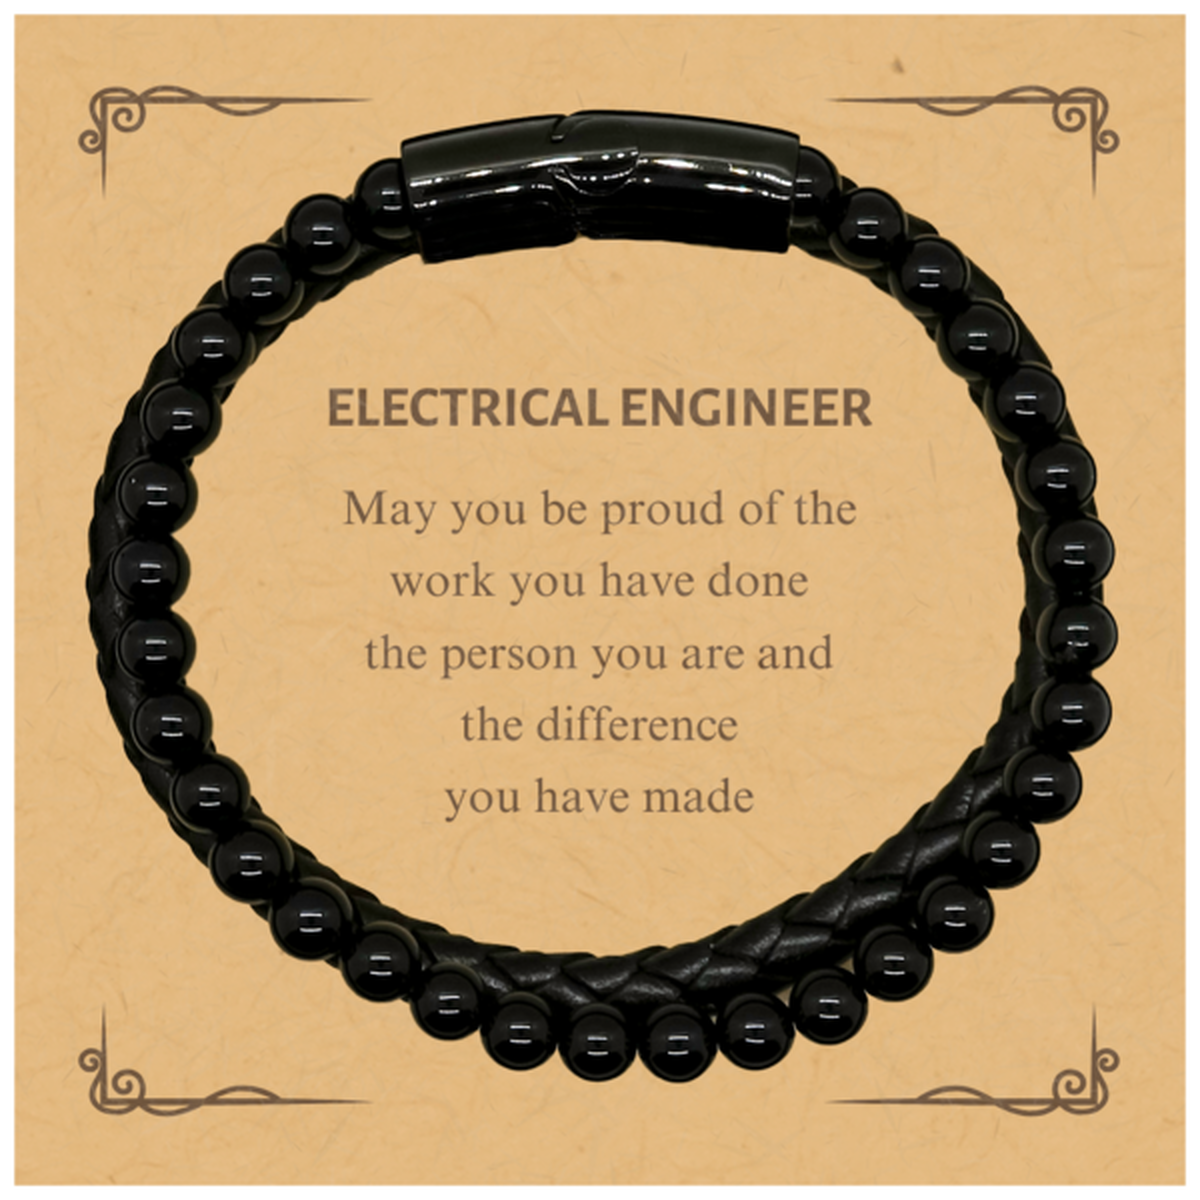 Electrical Engineer May you be proud of the work you have done, Retirement Electrical Engineer Stone Leather Bracelets for Colleague Appreciation Gifts Amazing for Electrical Engineer